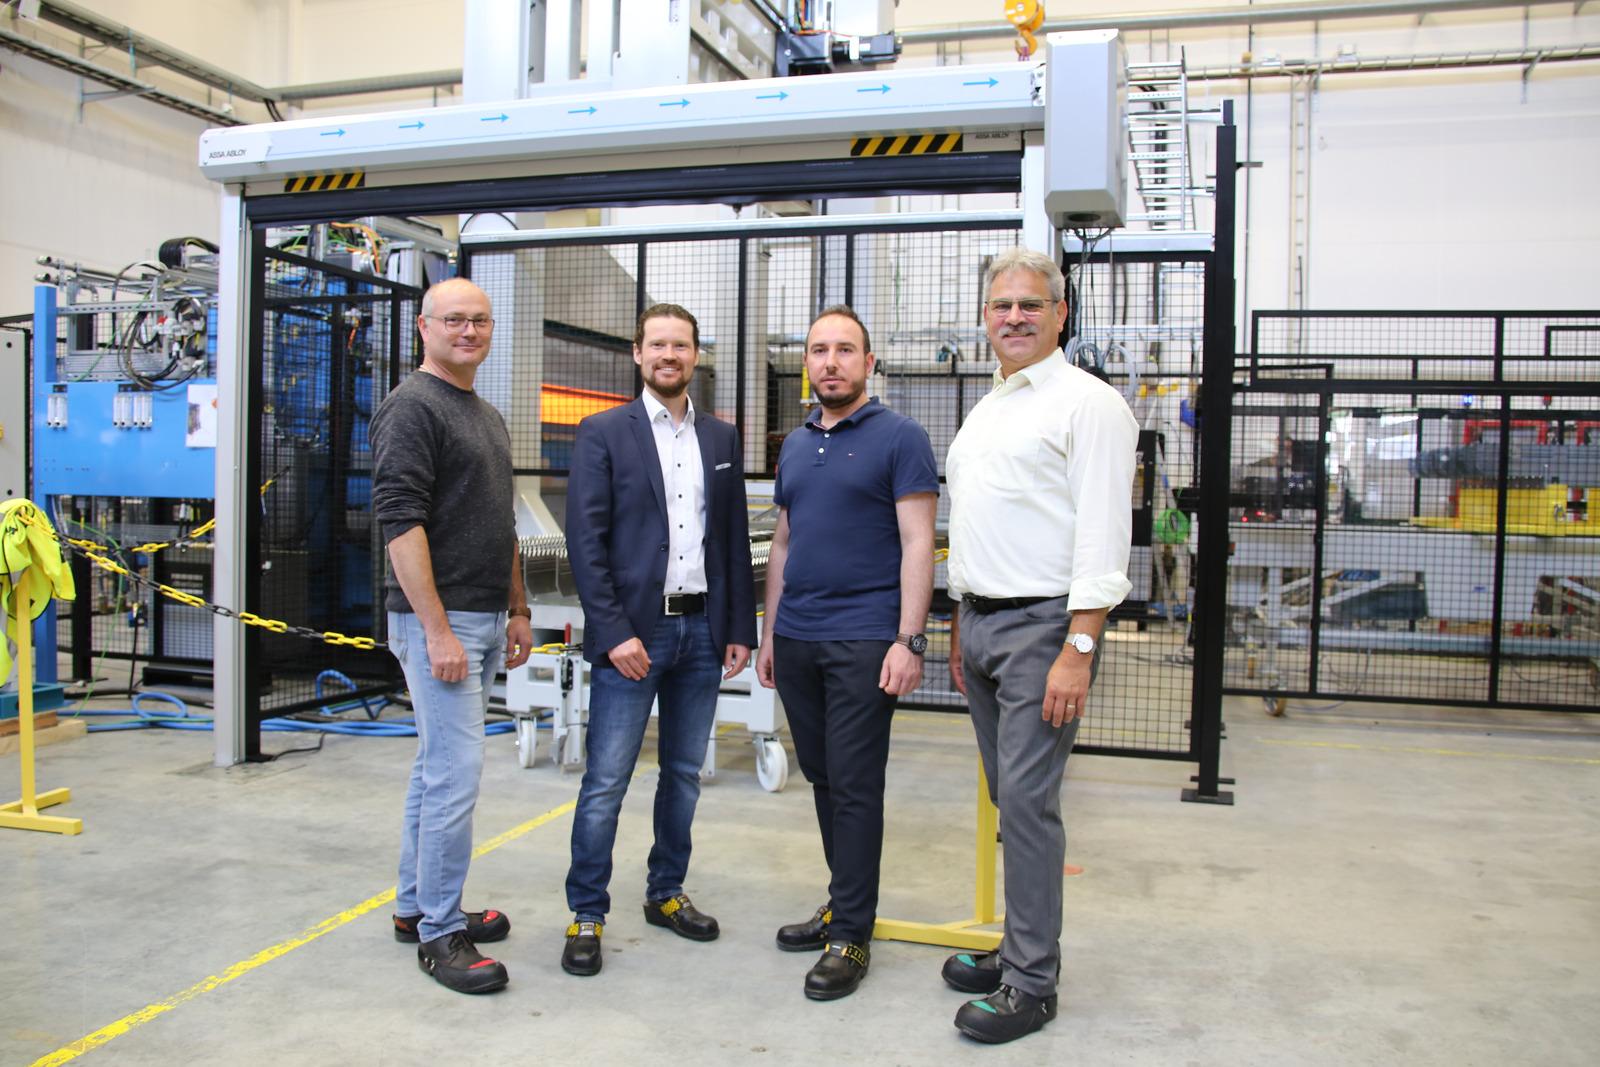 From left to right: Timo Wieland, Development RD/KRU at Mercedes-Benz, Achim Krauß Sales Manager, AP&T, Polychronis Pavlidis, Project Manager, AP&T and Hans Reinert, Team Lead Development RD at Mercedes-Benz. 